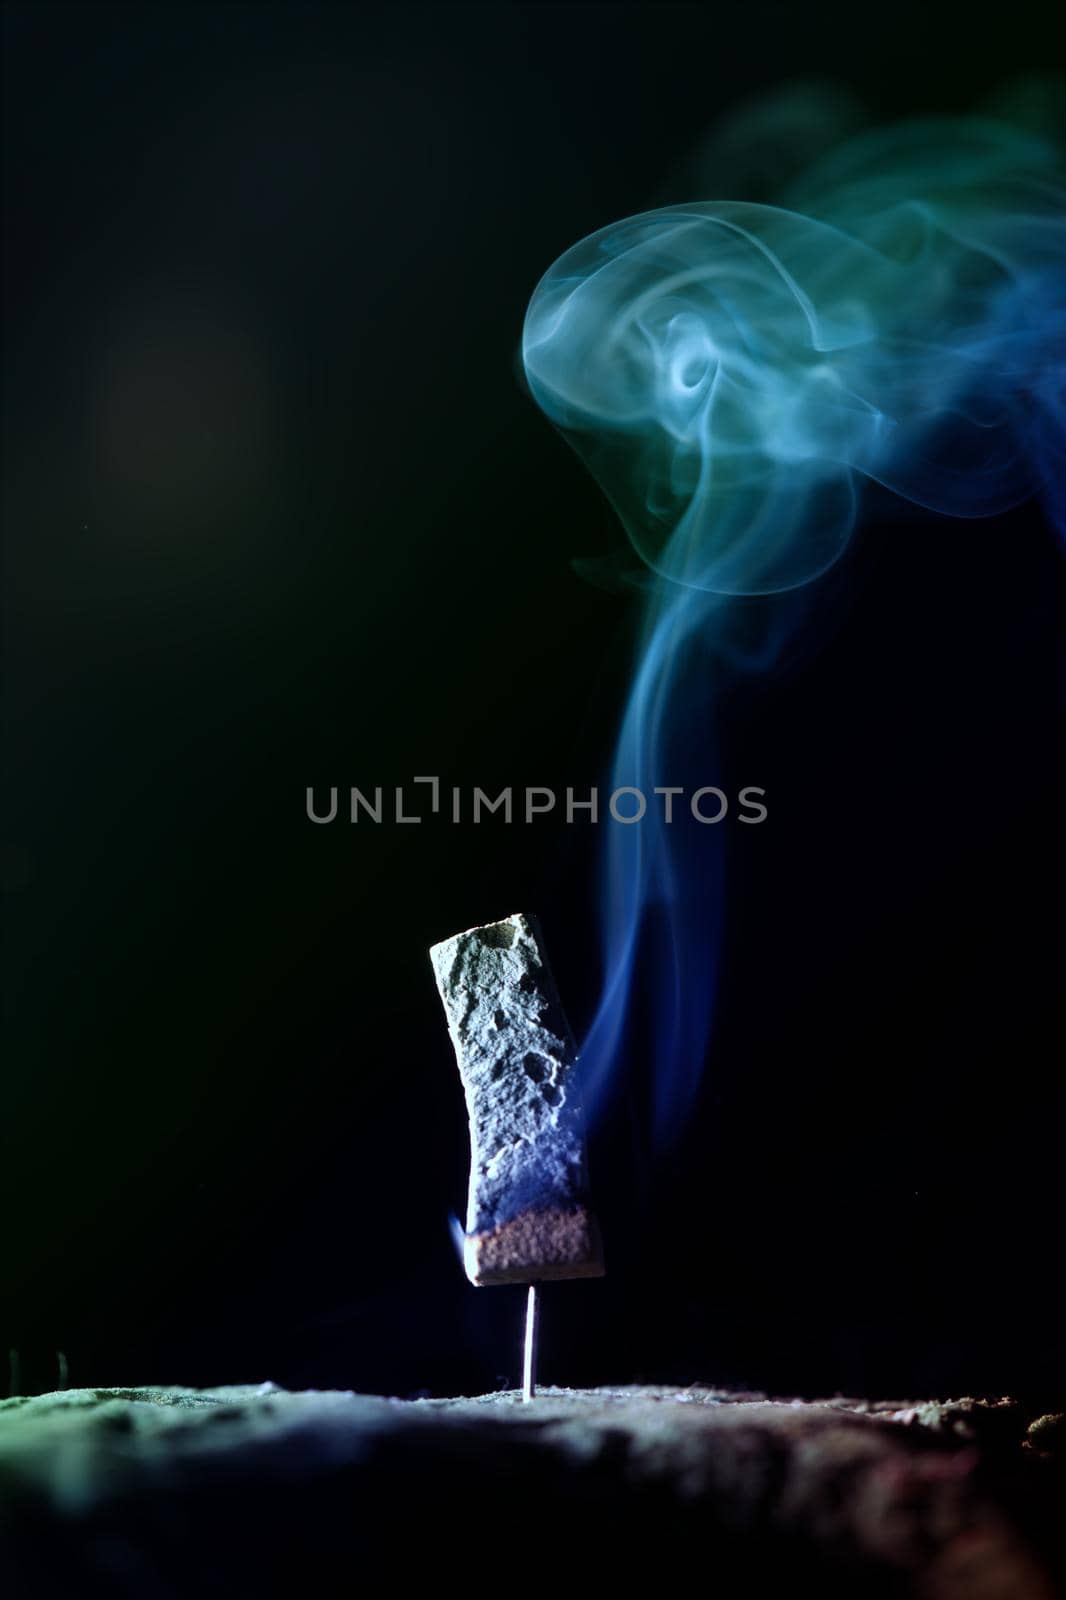 Incense burning incense, white smoke, black background, used as background image Paying homage to the sacred objects of the people of Buddhism according to their beliefs and beliefs.